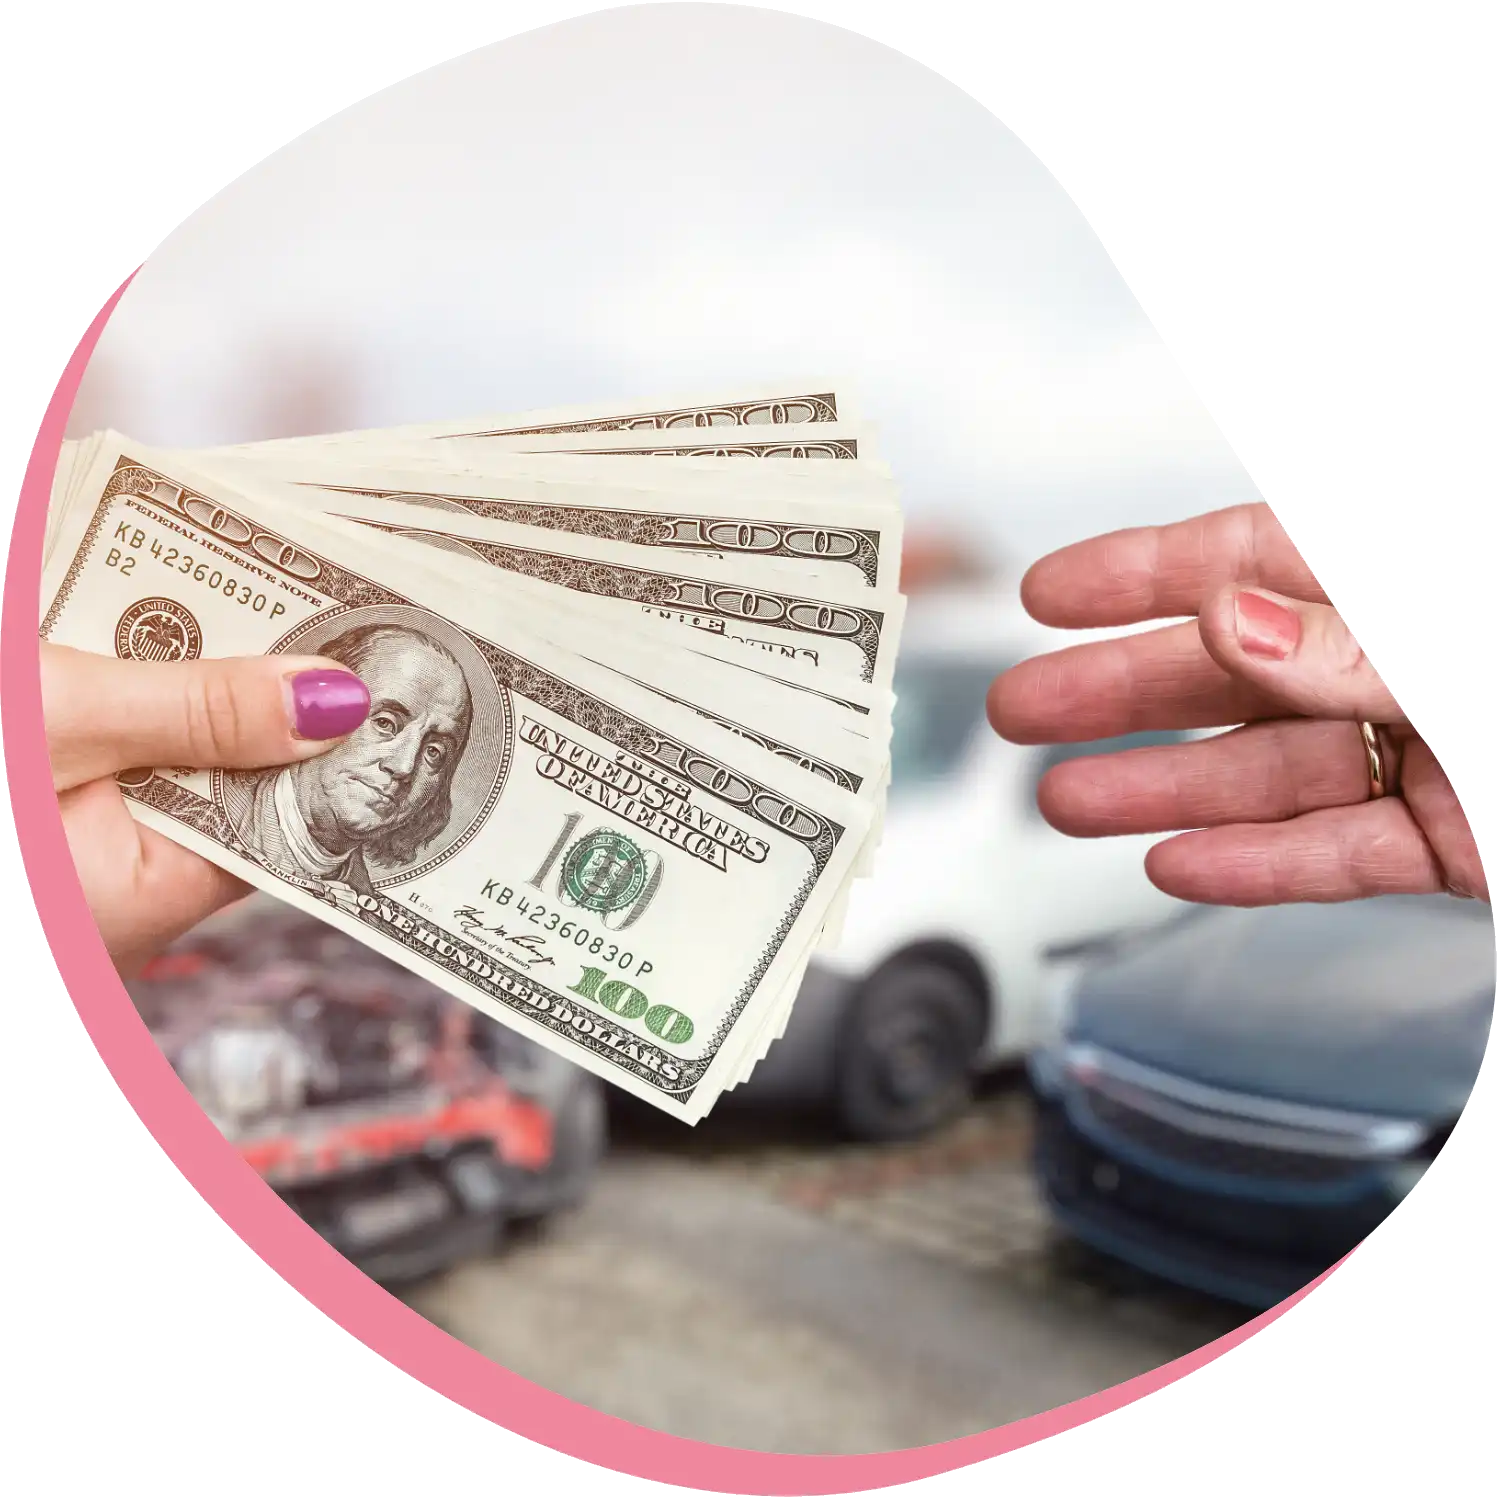 Car Accident Loans - If you're in a car accident and can't work, you may be able to get a loan to cover your expenses.